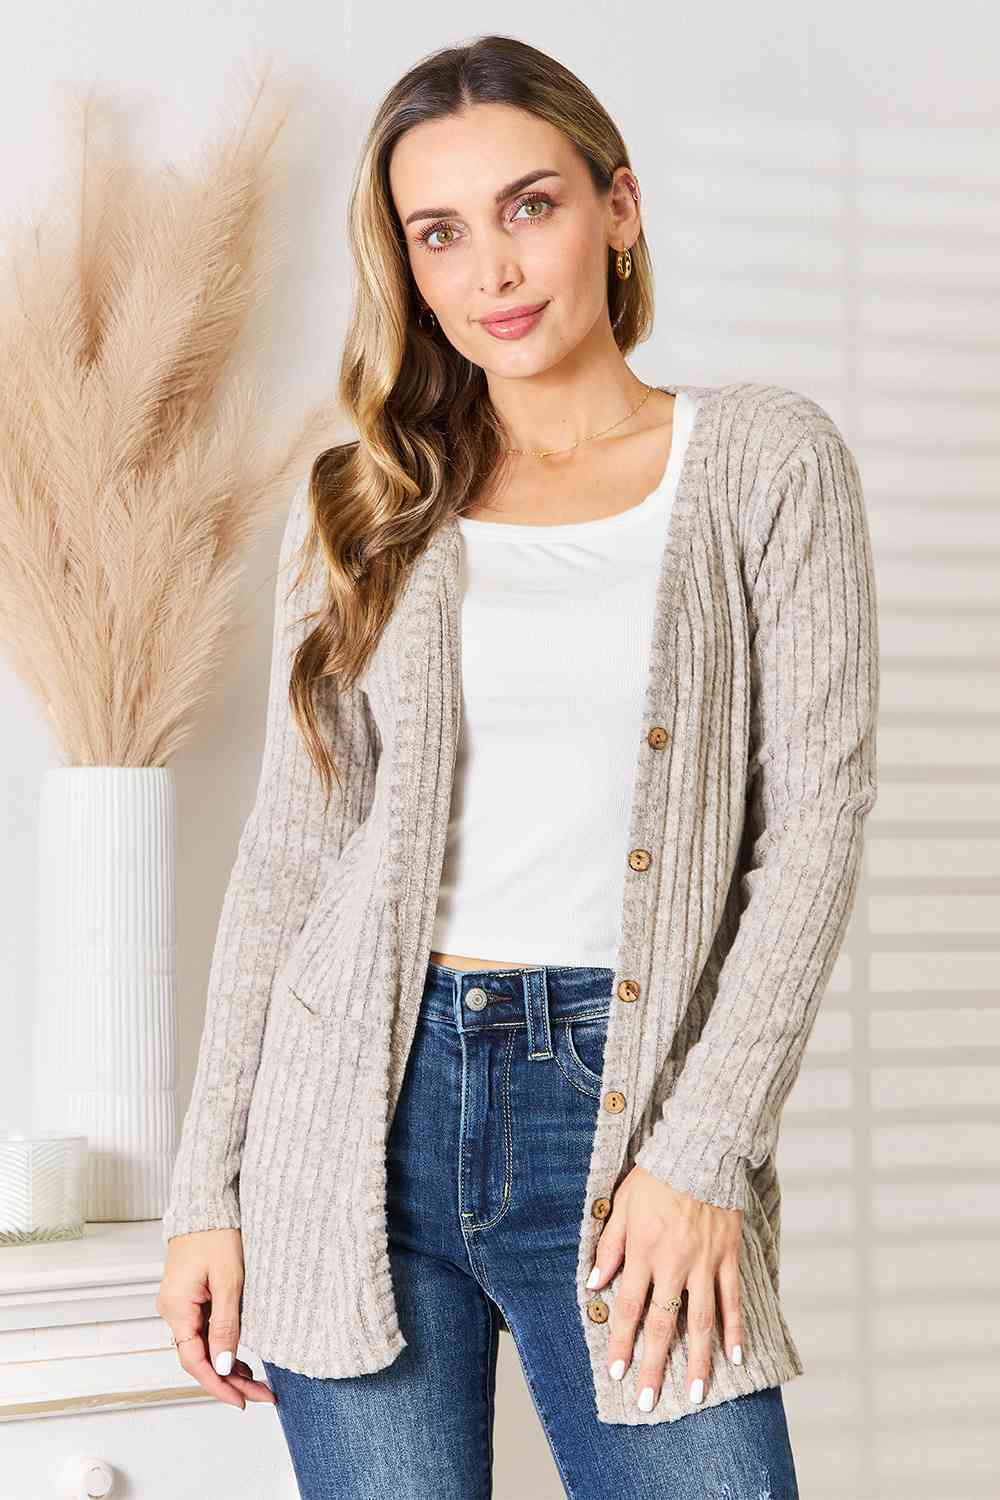 Ribbed Button-Up Cardigan with Pockets - Women’s Clothing & Accessories - Shirts & Tops - 1 - 2024